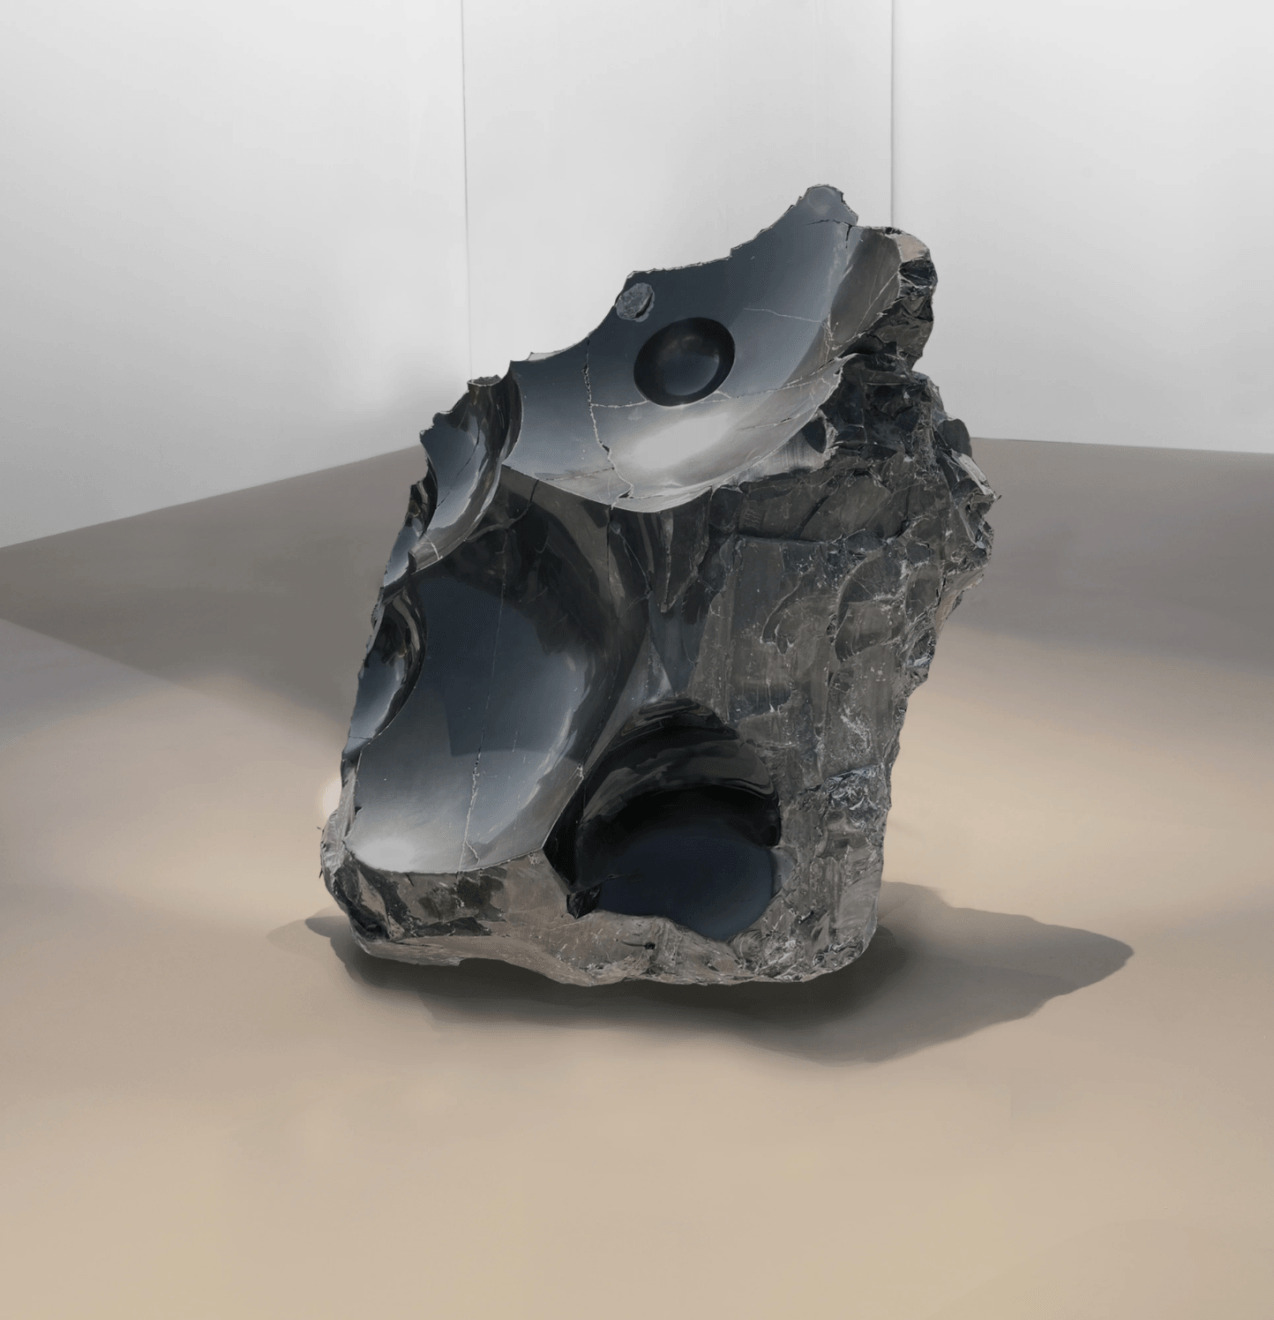 Julian Charri&egrave;re Thickens, pools, flows, rushes, slows, 2020 the work is accompanied by a signed certificate of authenticity obsidian 41 5/16 x 45 1/4 x 59 1/16 inches (105 x 115 x 150 cm) (JCh-277)